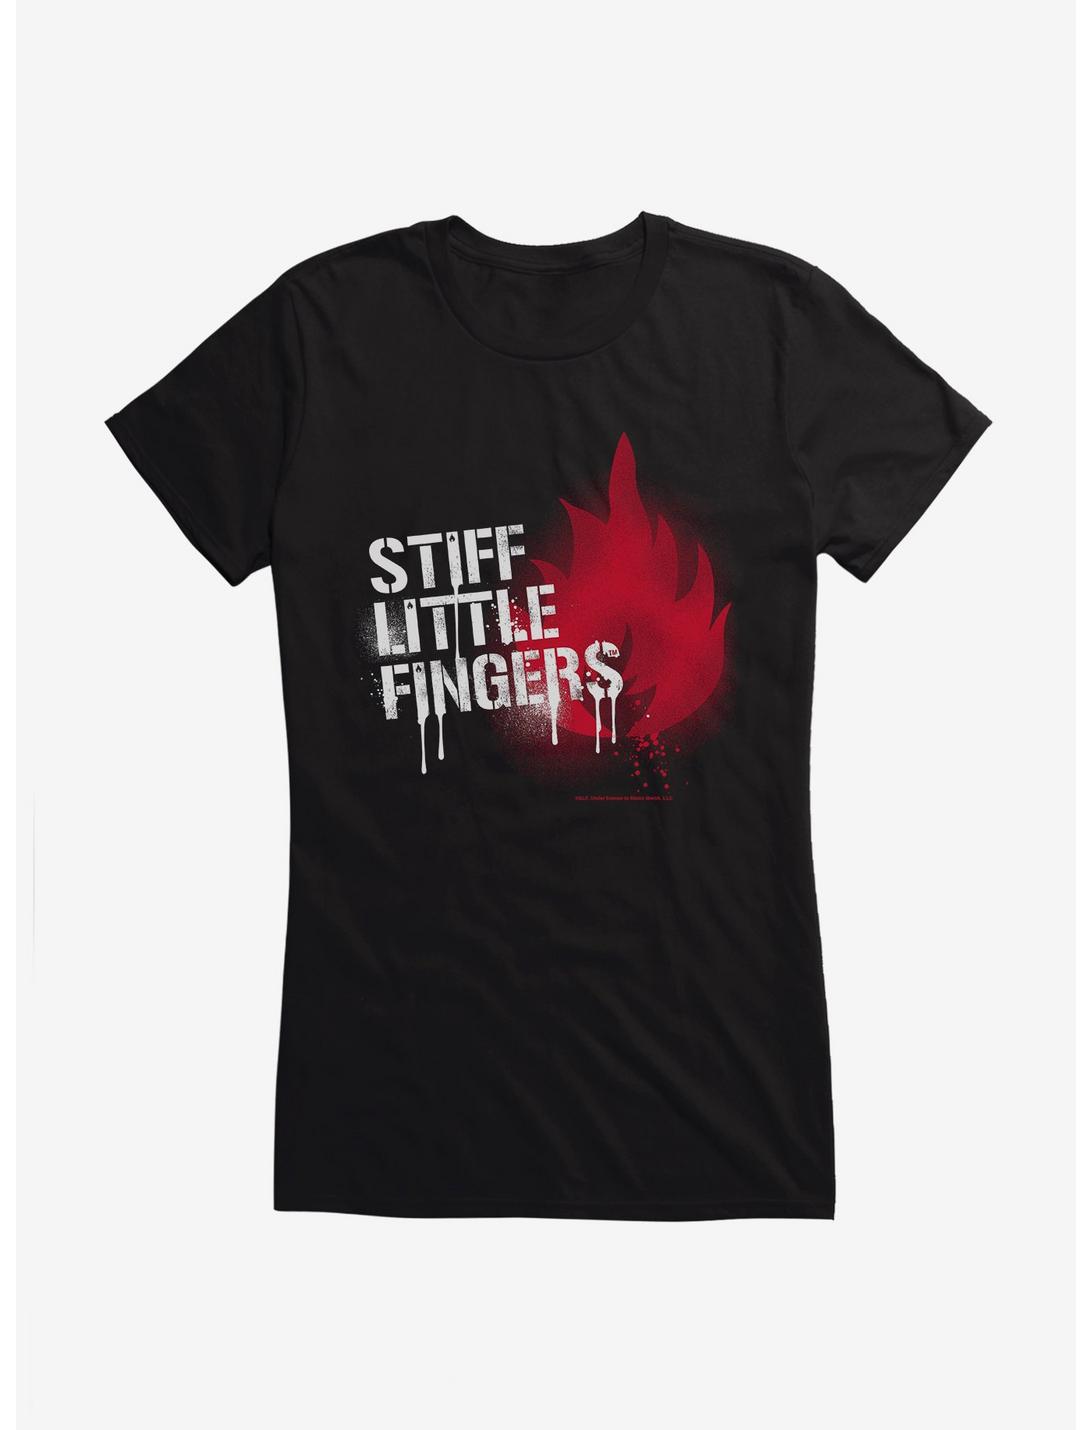 Stiff Little Fingers Inflammable Material Girls T-Shirt, BLACK, hi-res